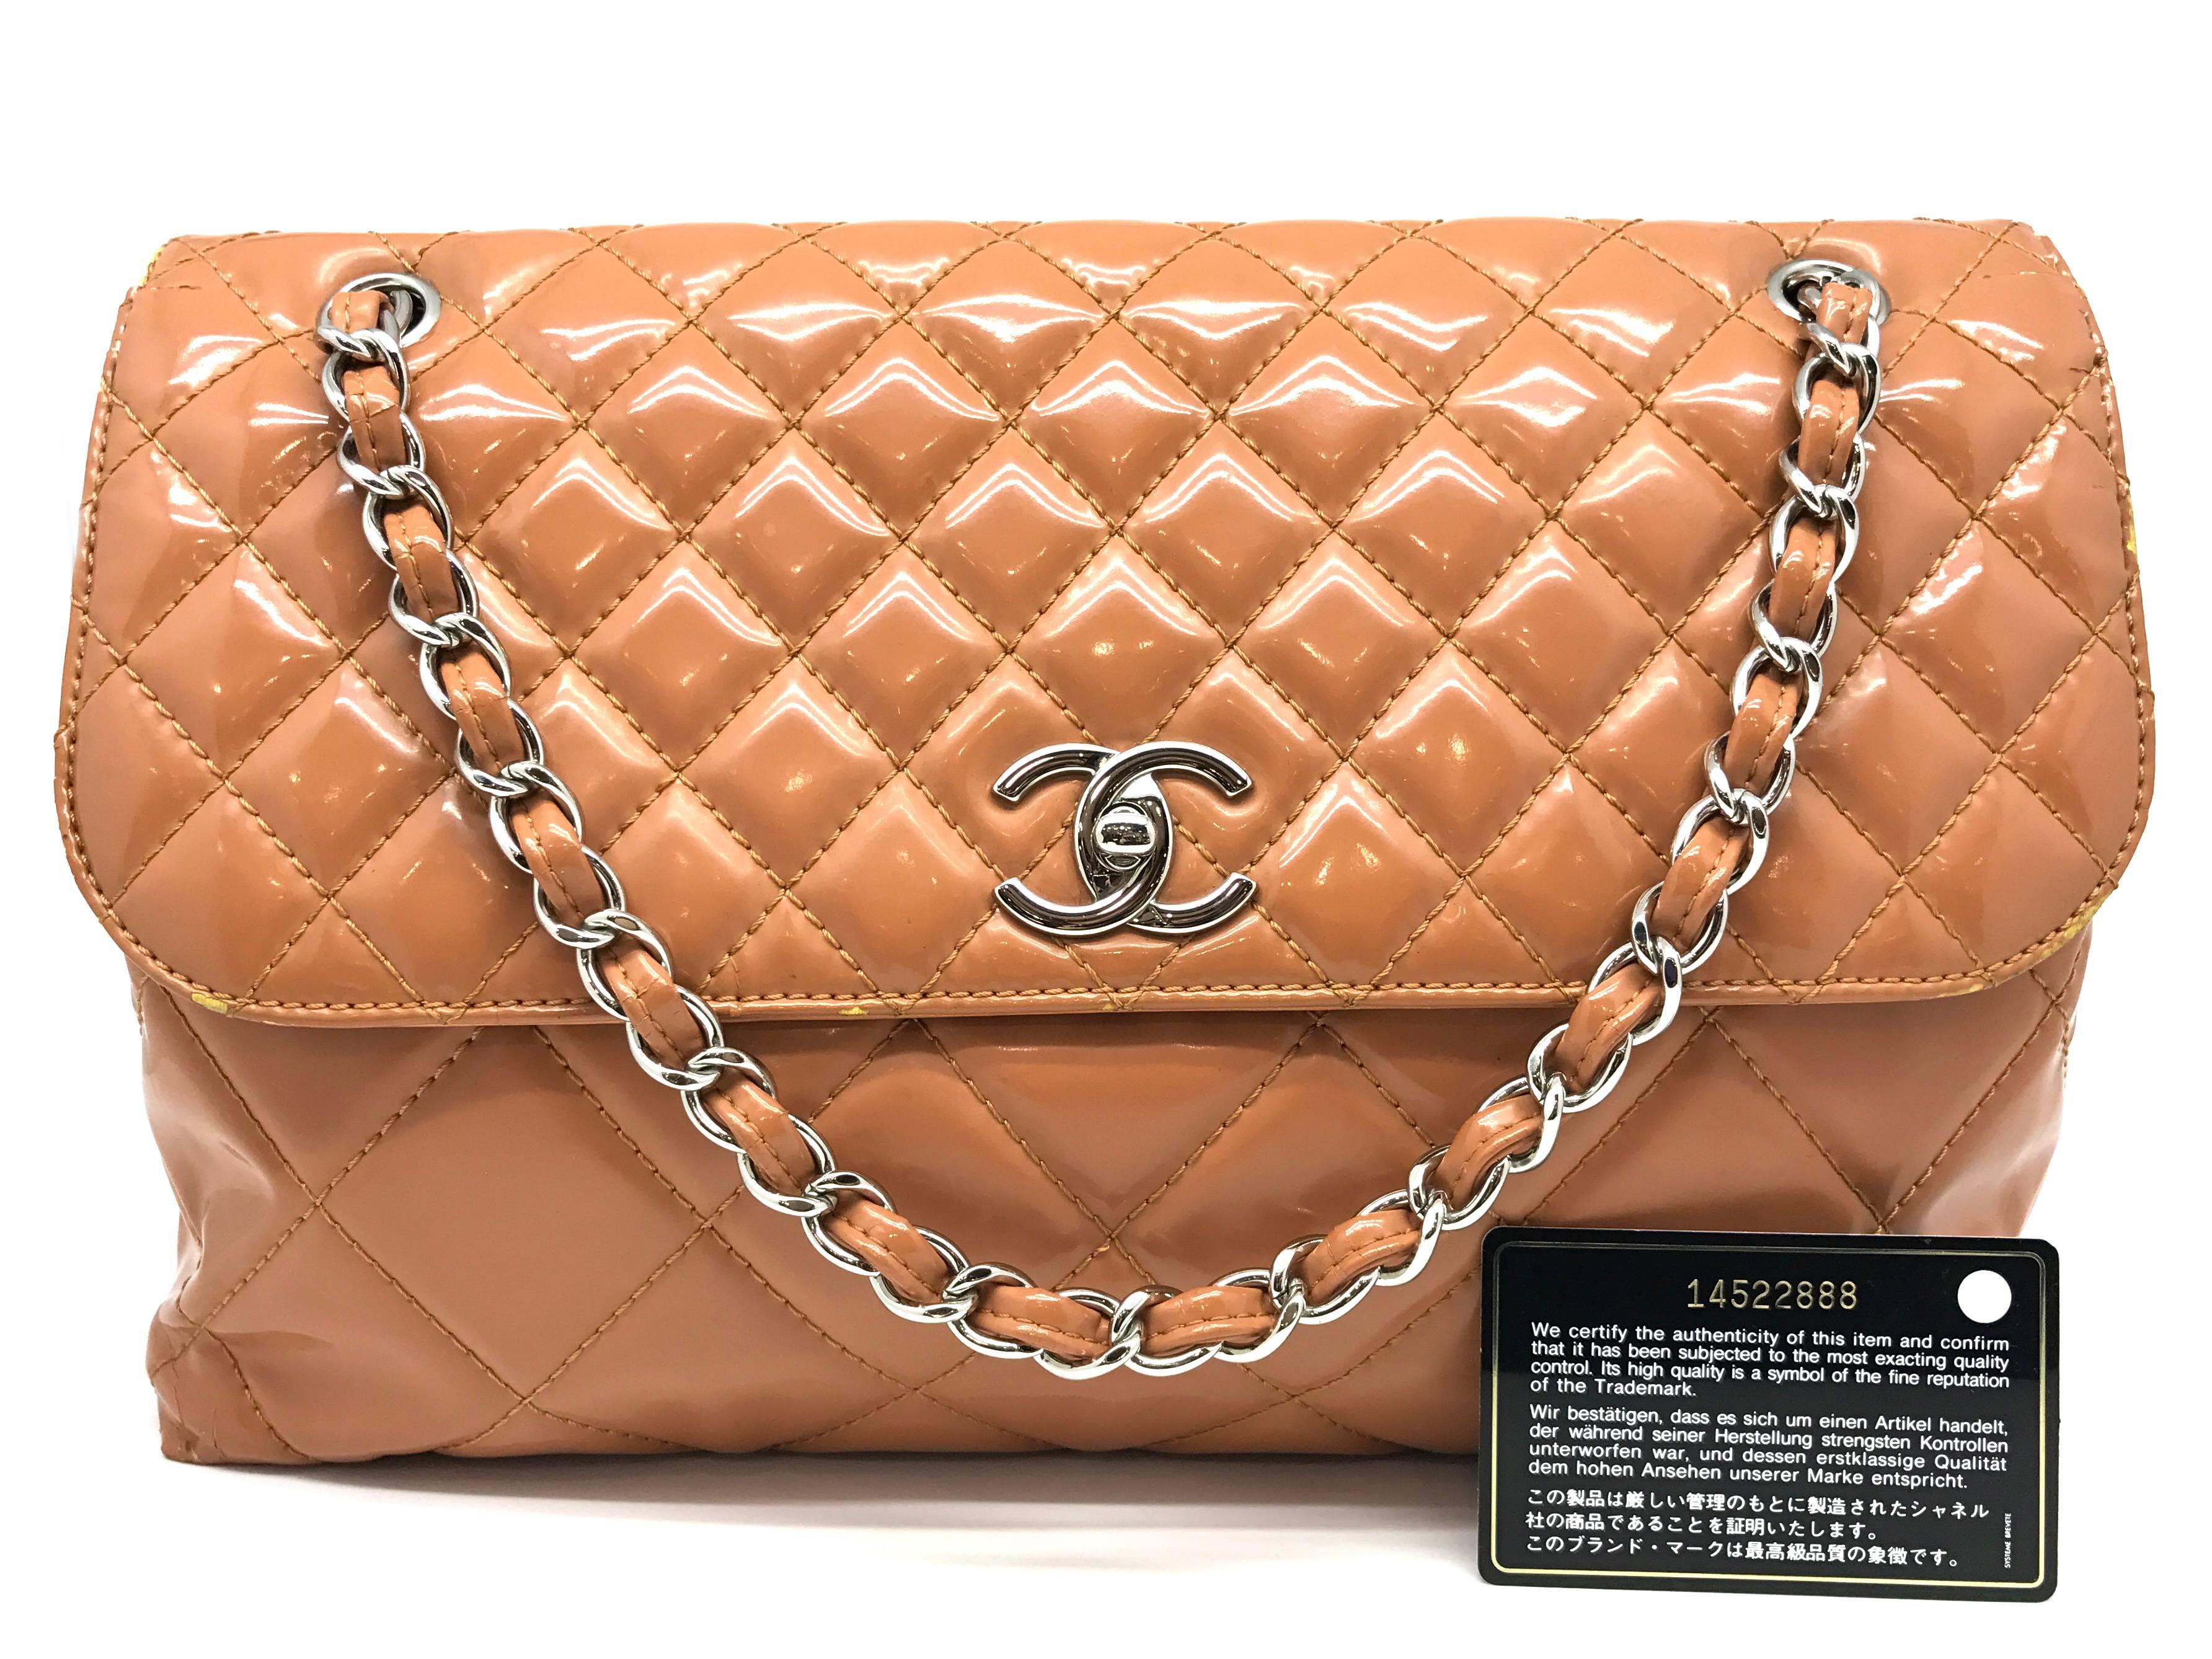 Color: Orange
Material: Patent Leather

Condition:
Rank C
Overall: Poor. Serious Defects
Surface: Obvious Scratches & Stains
Corners: Obvious Scratches & Stains
Edges: Obvious Scratches & Stains
Handles/Straps: Minor Scratches
Hardware: